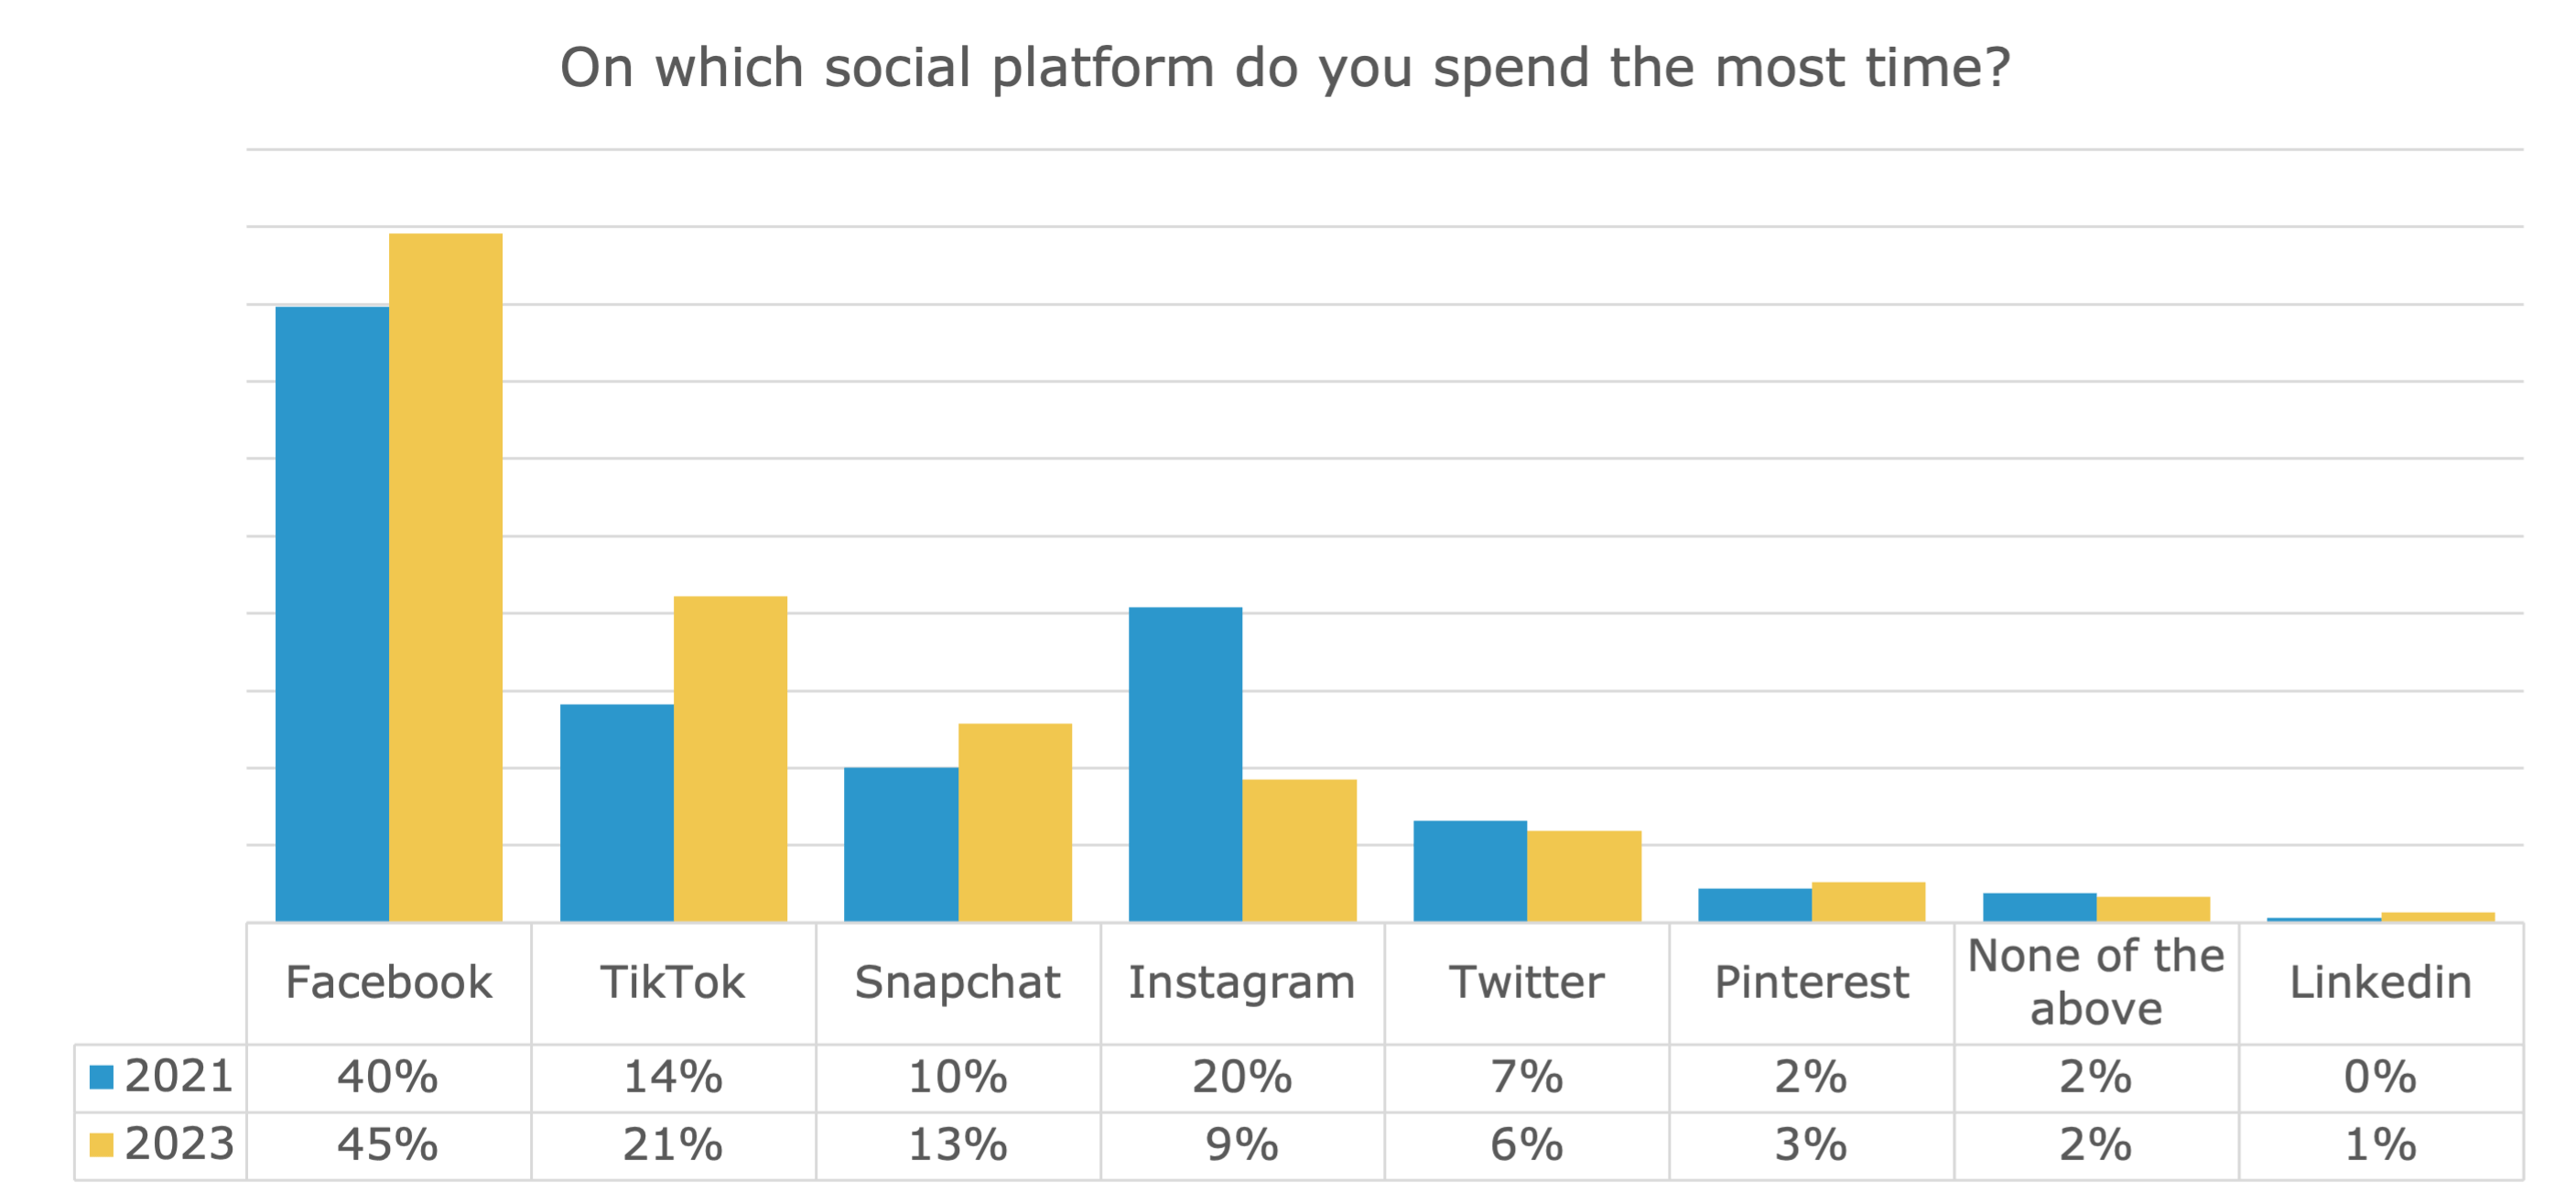 Chart of which social platform users spend the most time on.